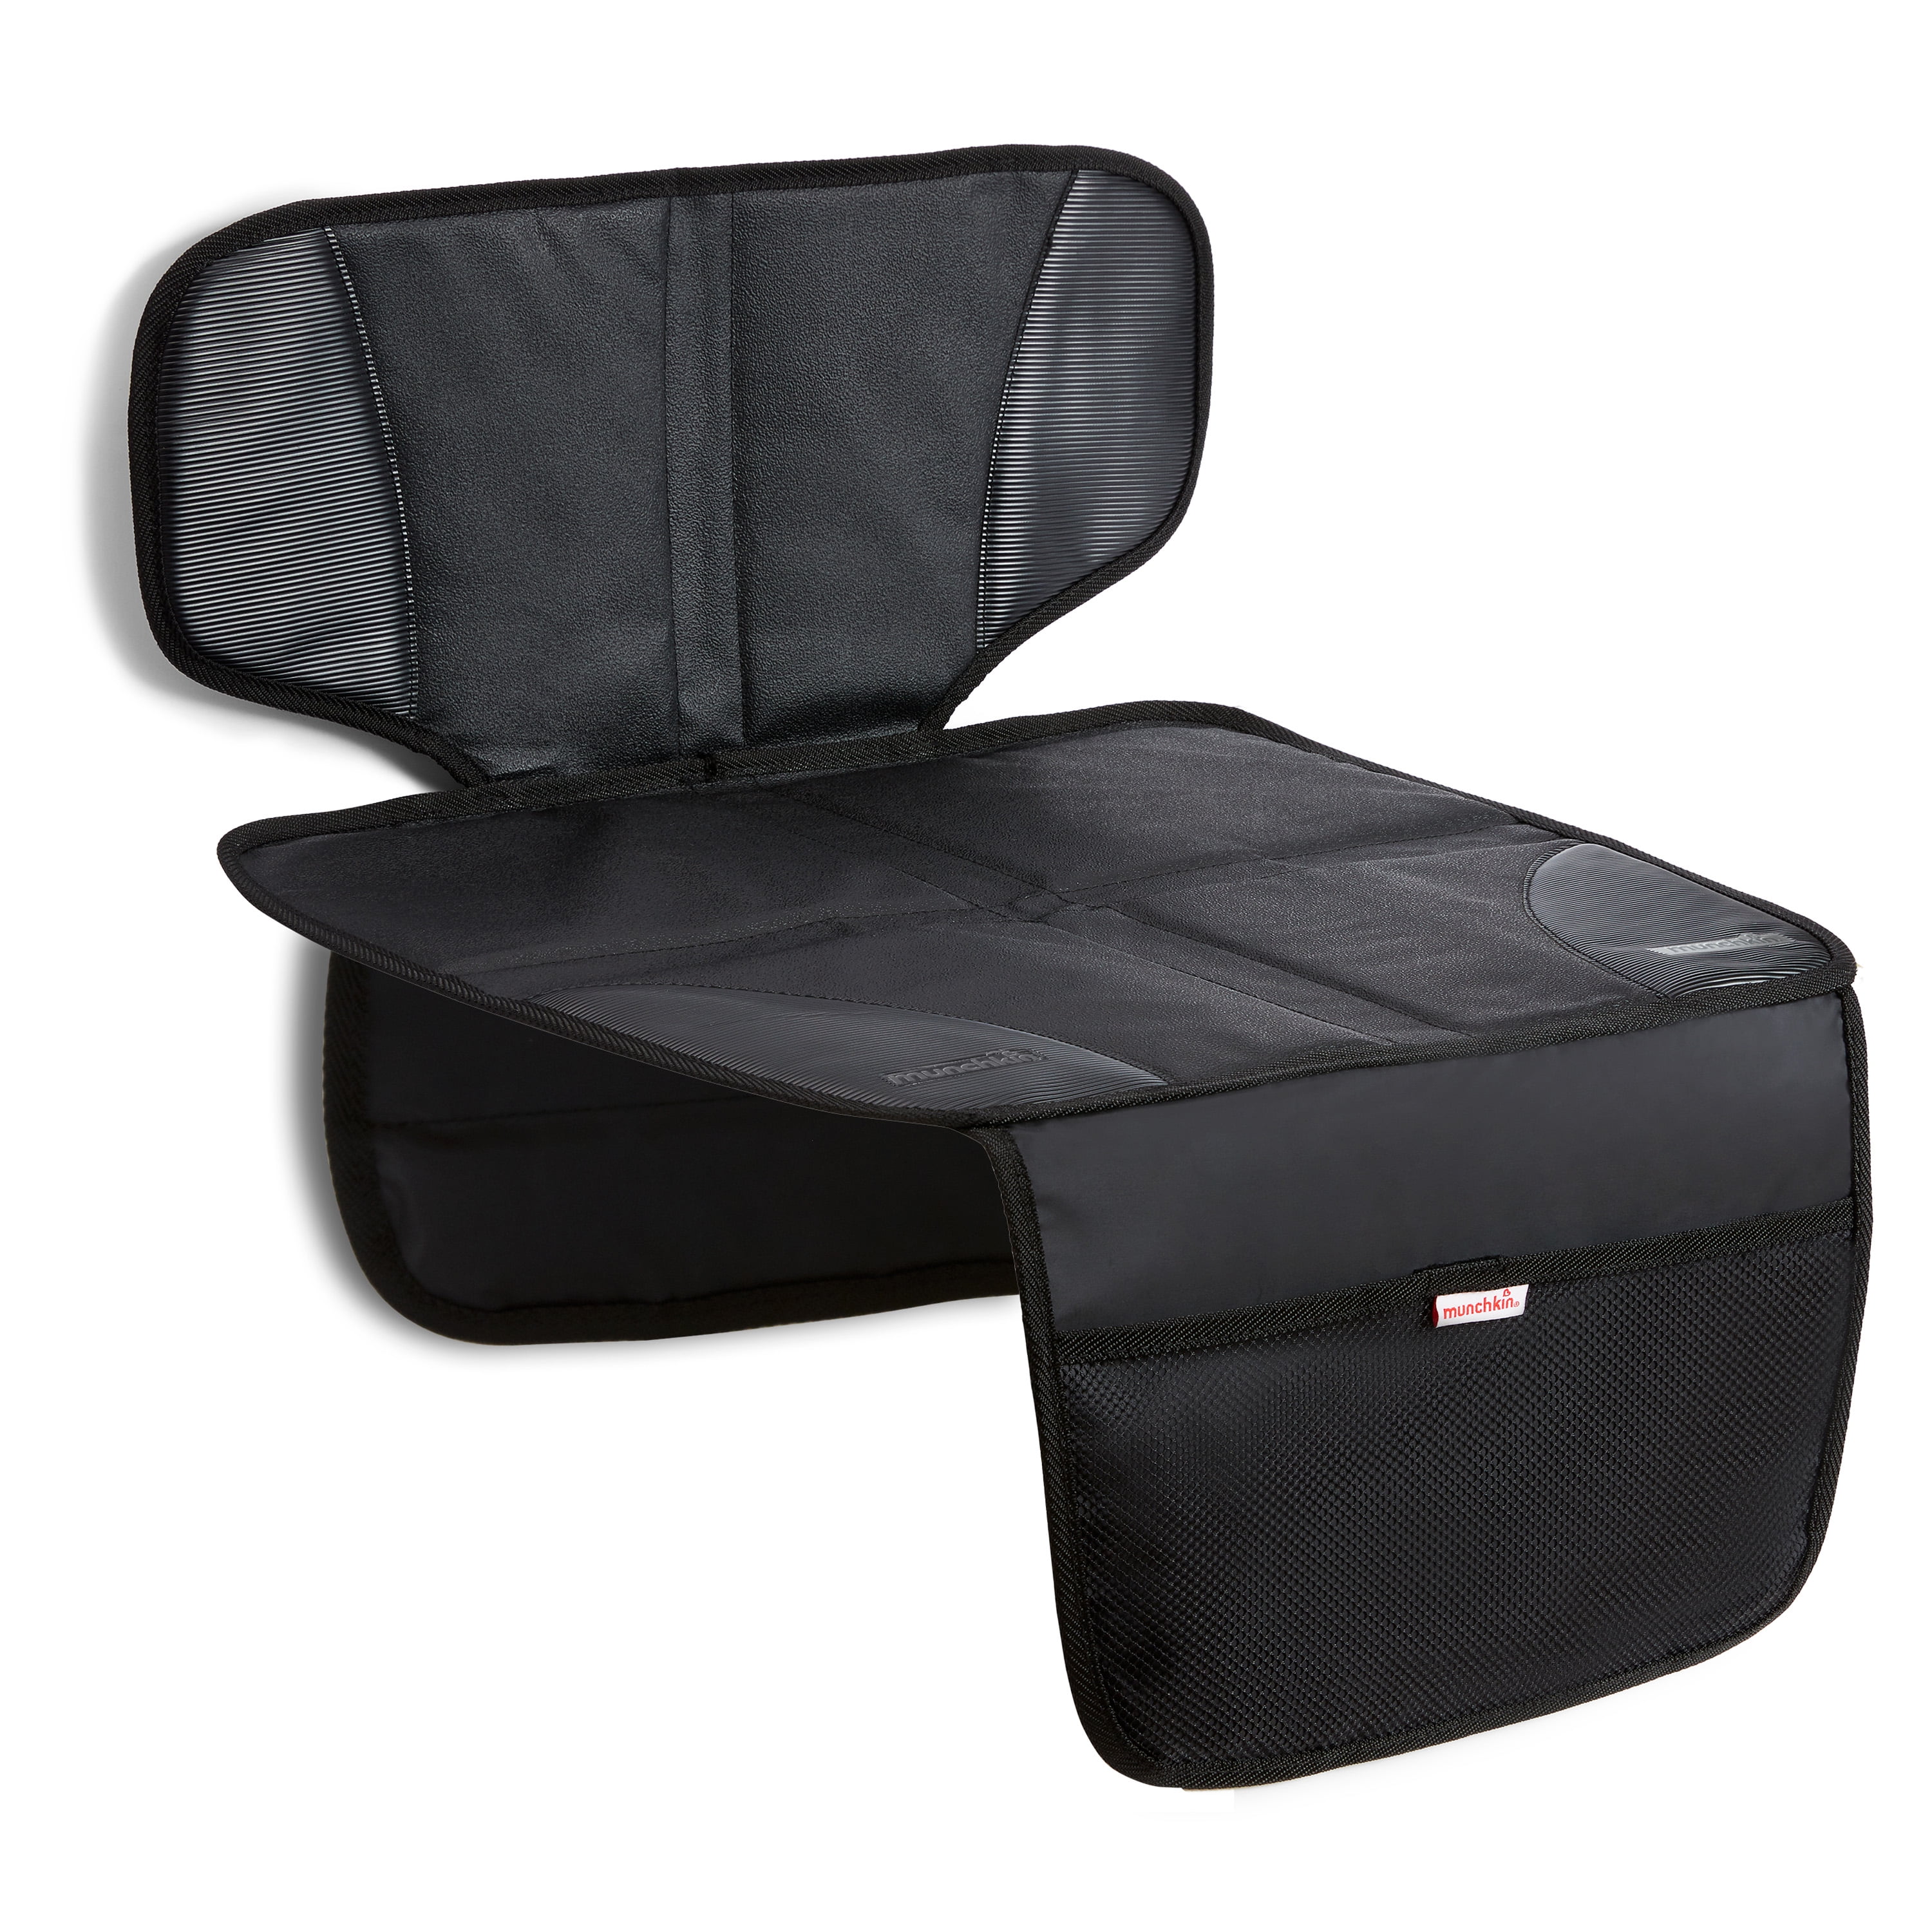 MUNCHKIN DELUXE KIDS REAR SEAT PROTECTOR MAT X2 PACK NEW 